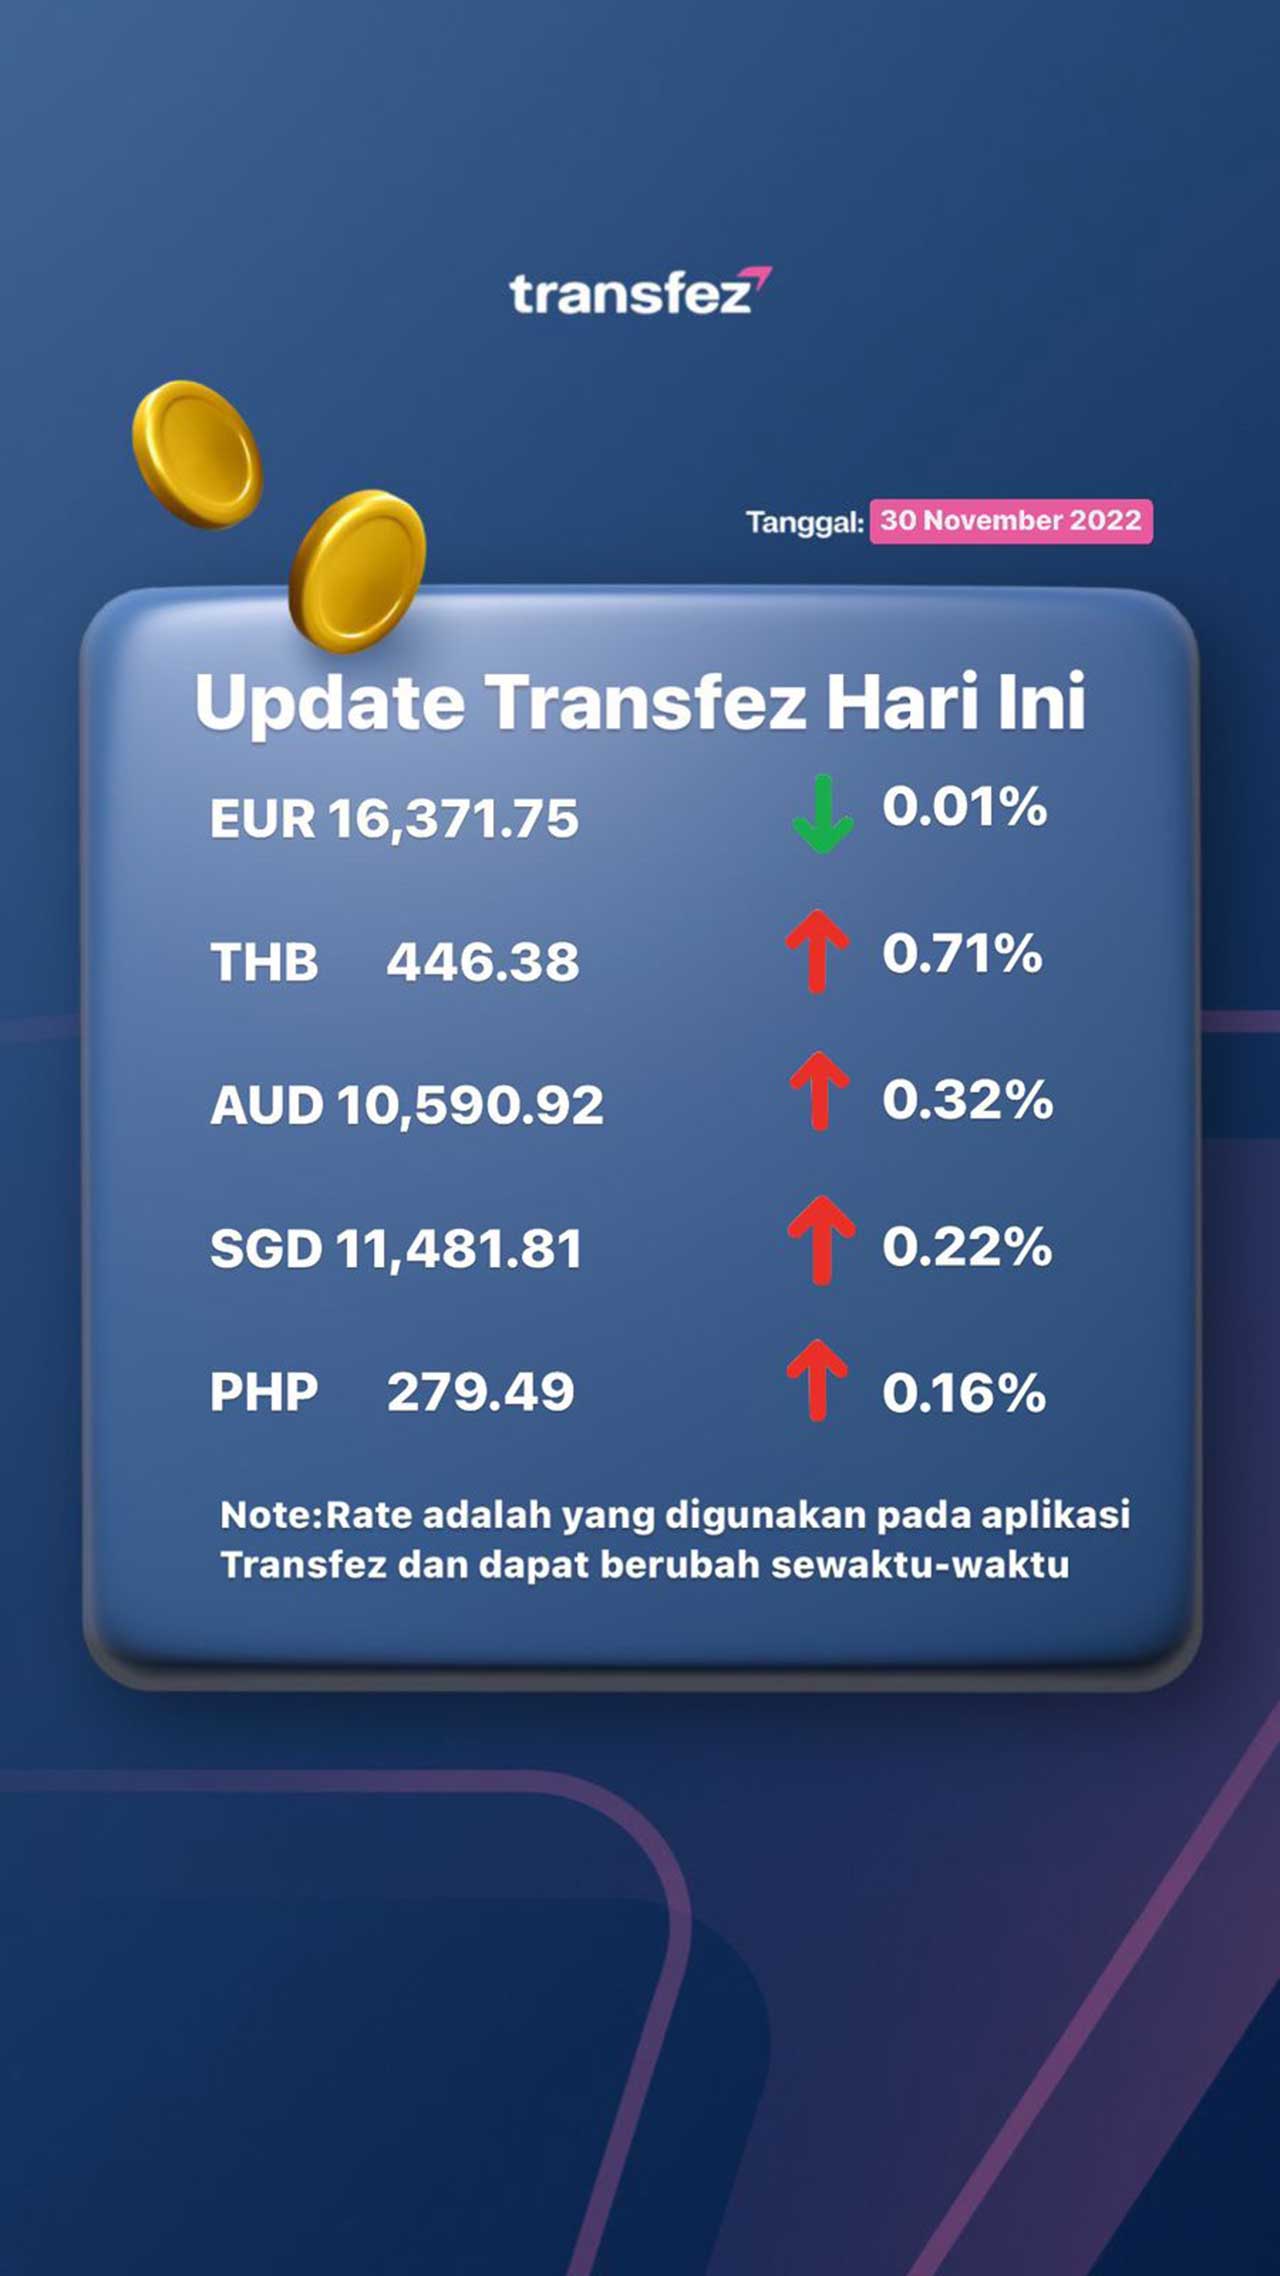 Today's Transfez Rate Update 30 November 2022